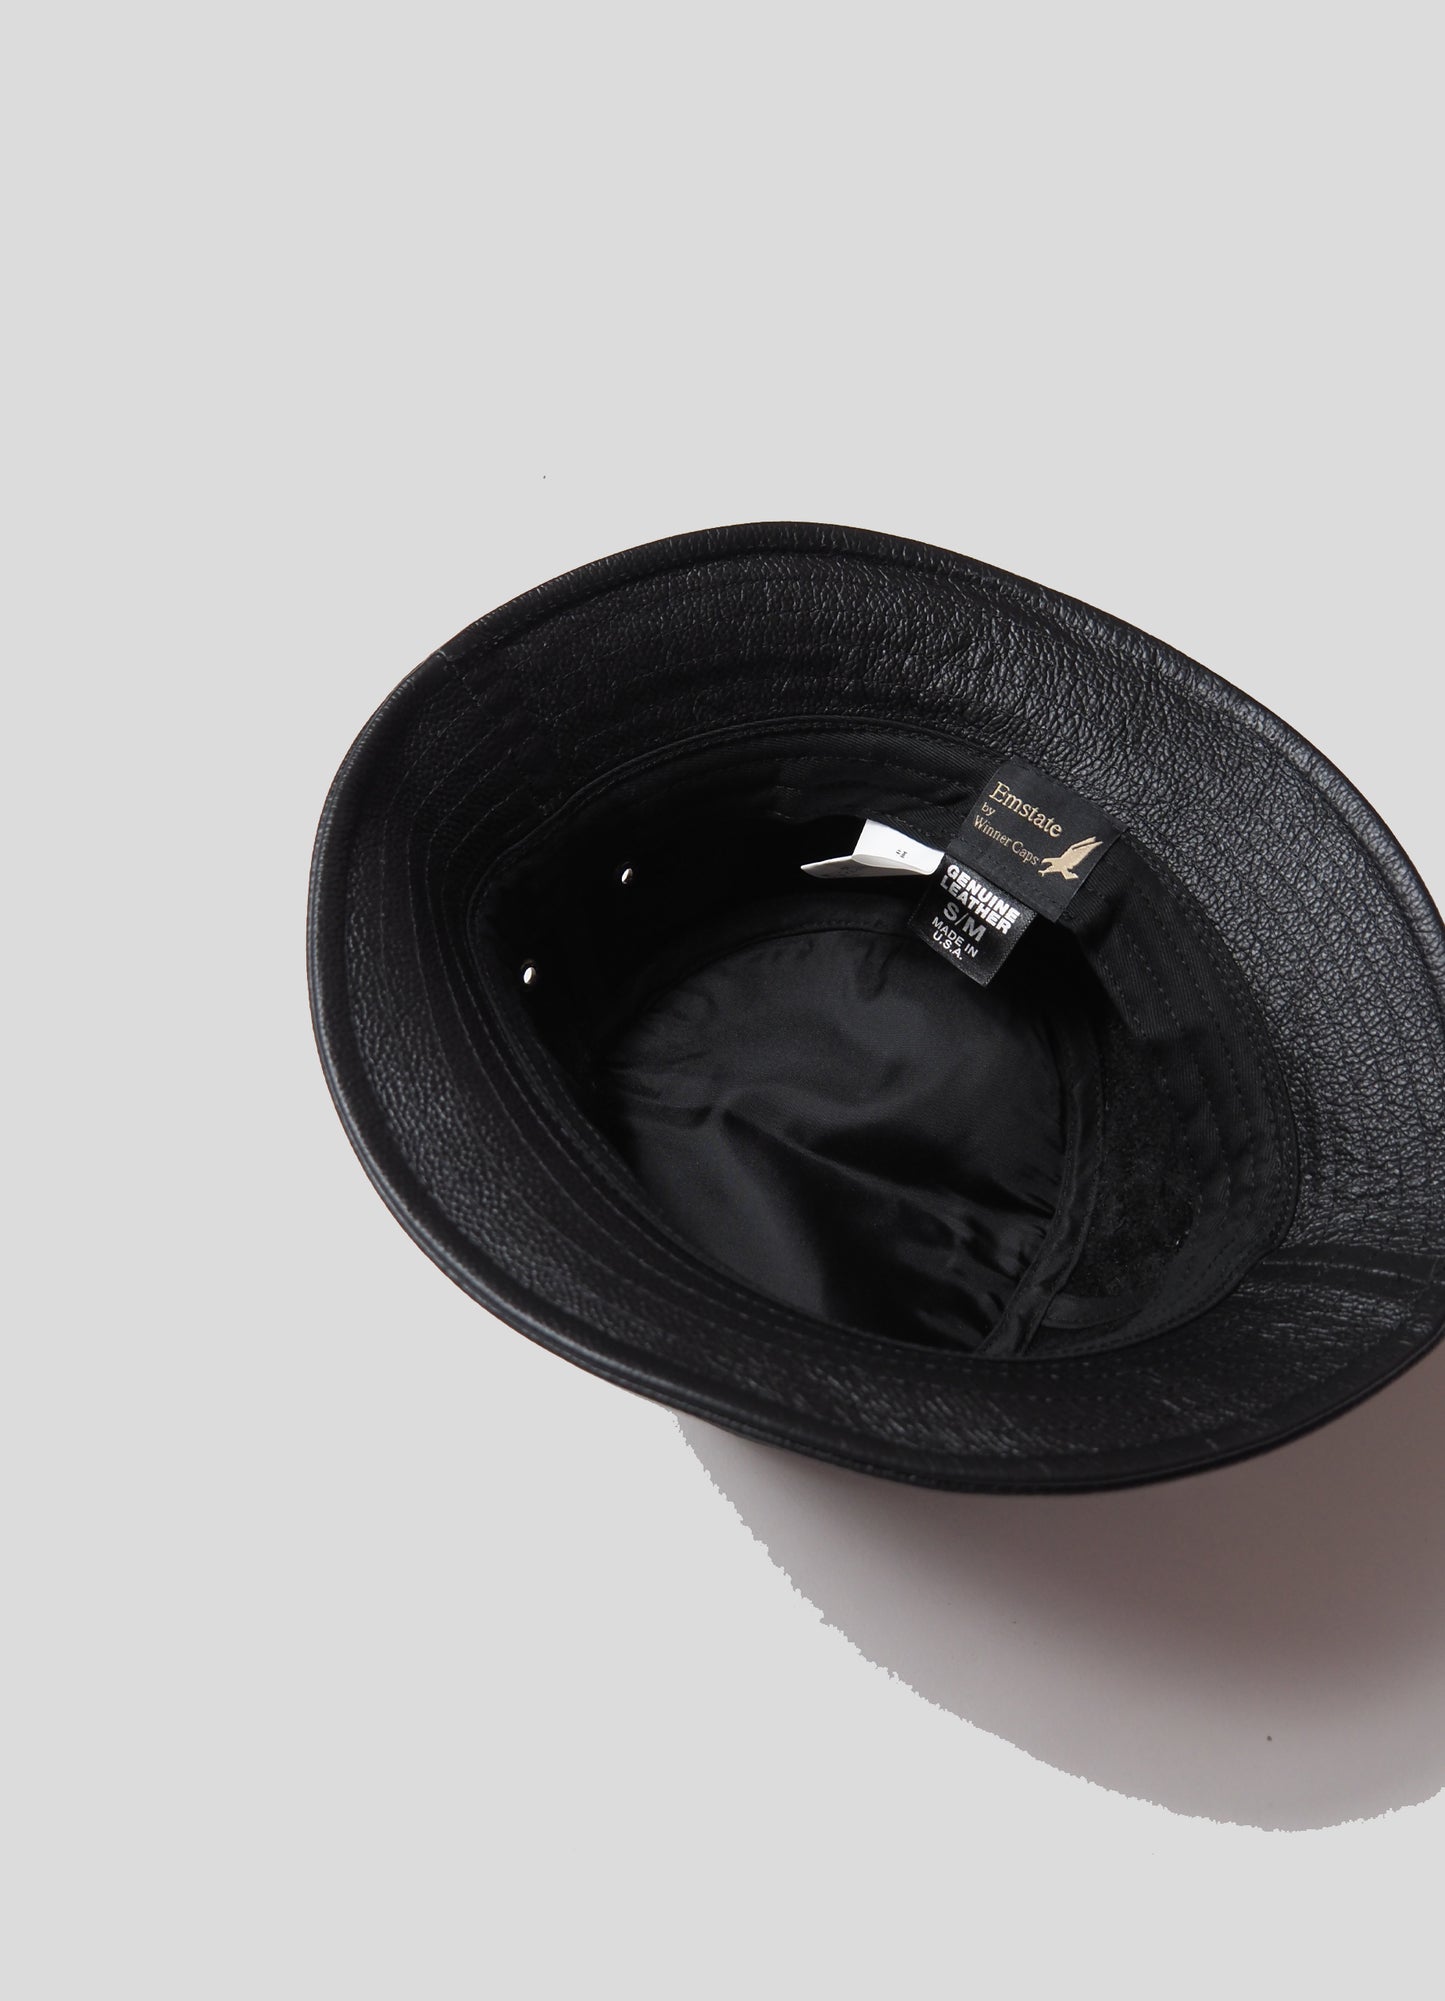 Emstate by Winner Caps(エムステイトバイウィナーキャップ) / Pebble Leather Bucket Hat [#BUG-LT]-Lism Select